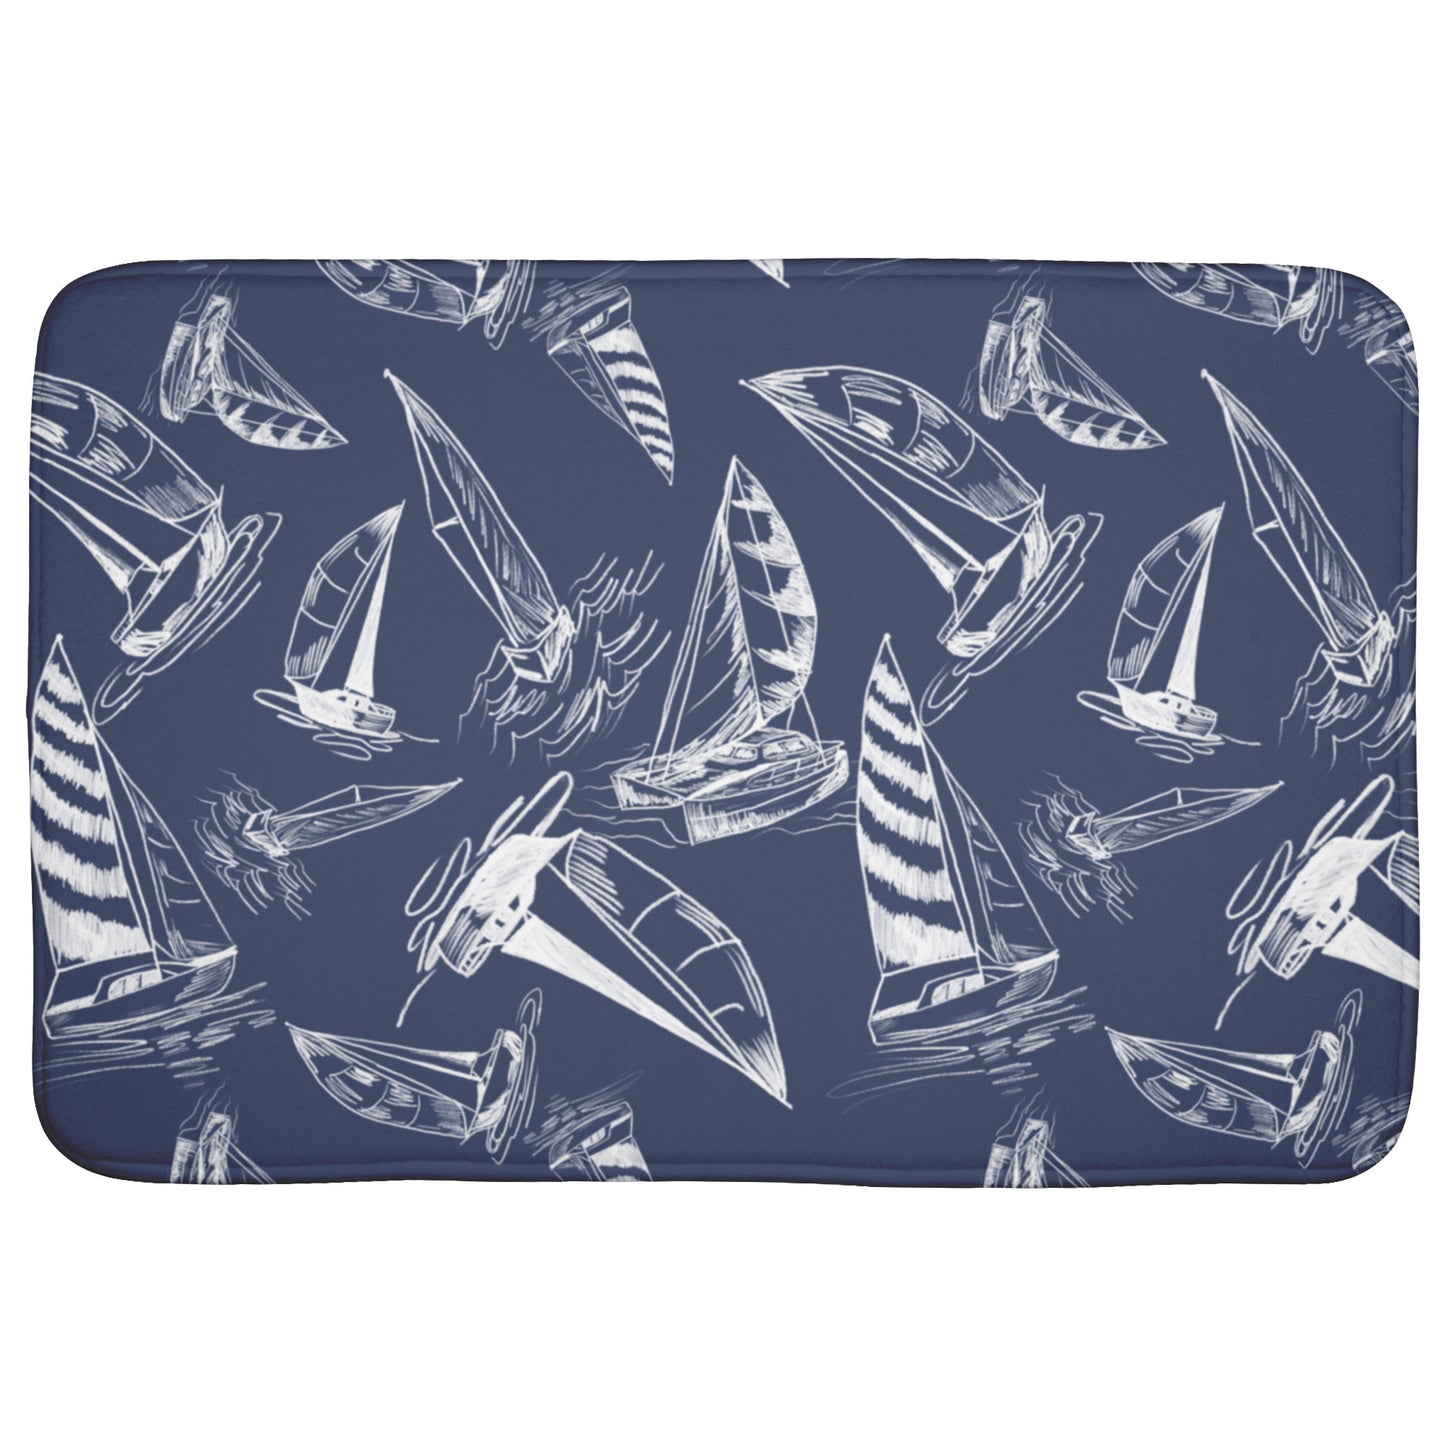 Sailboat Sketches on Navy Blue Background, Bath Mats